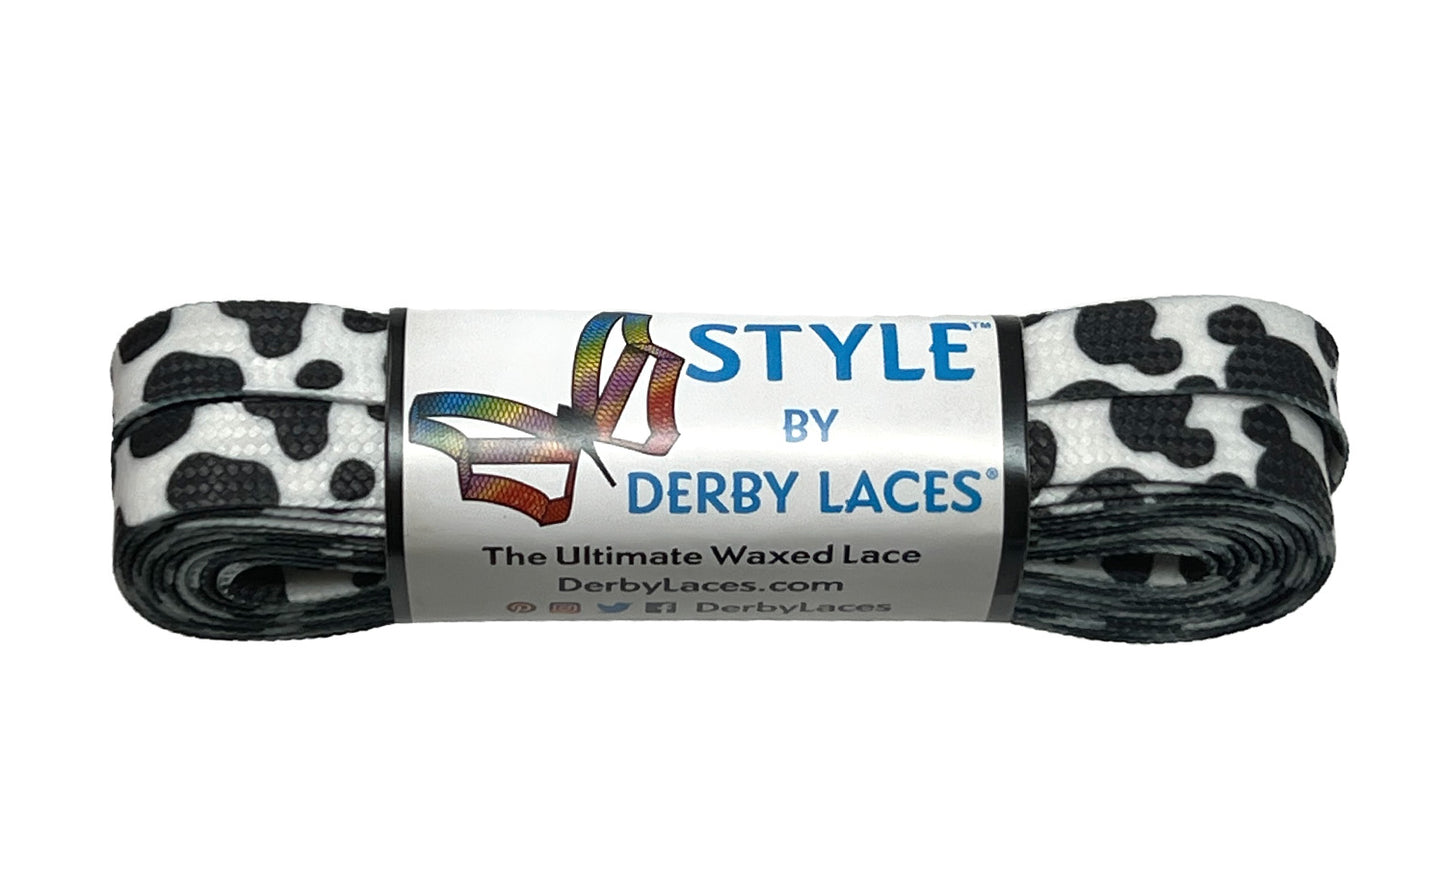 Derby Laces STYLE "GONE WILD" 10mm Waxed